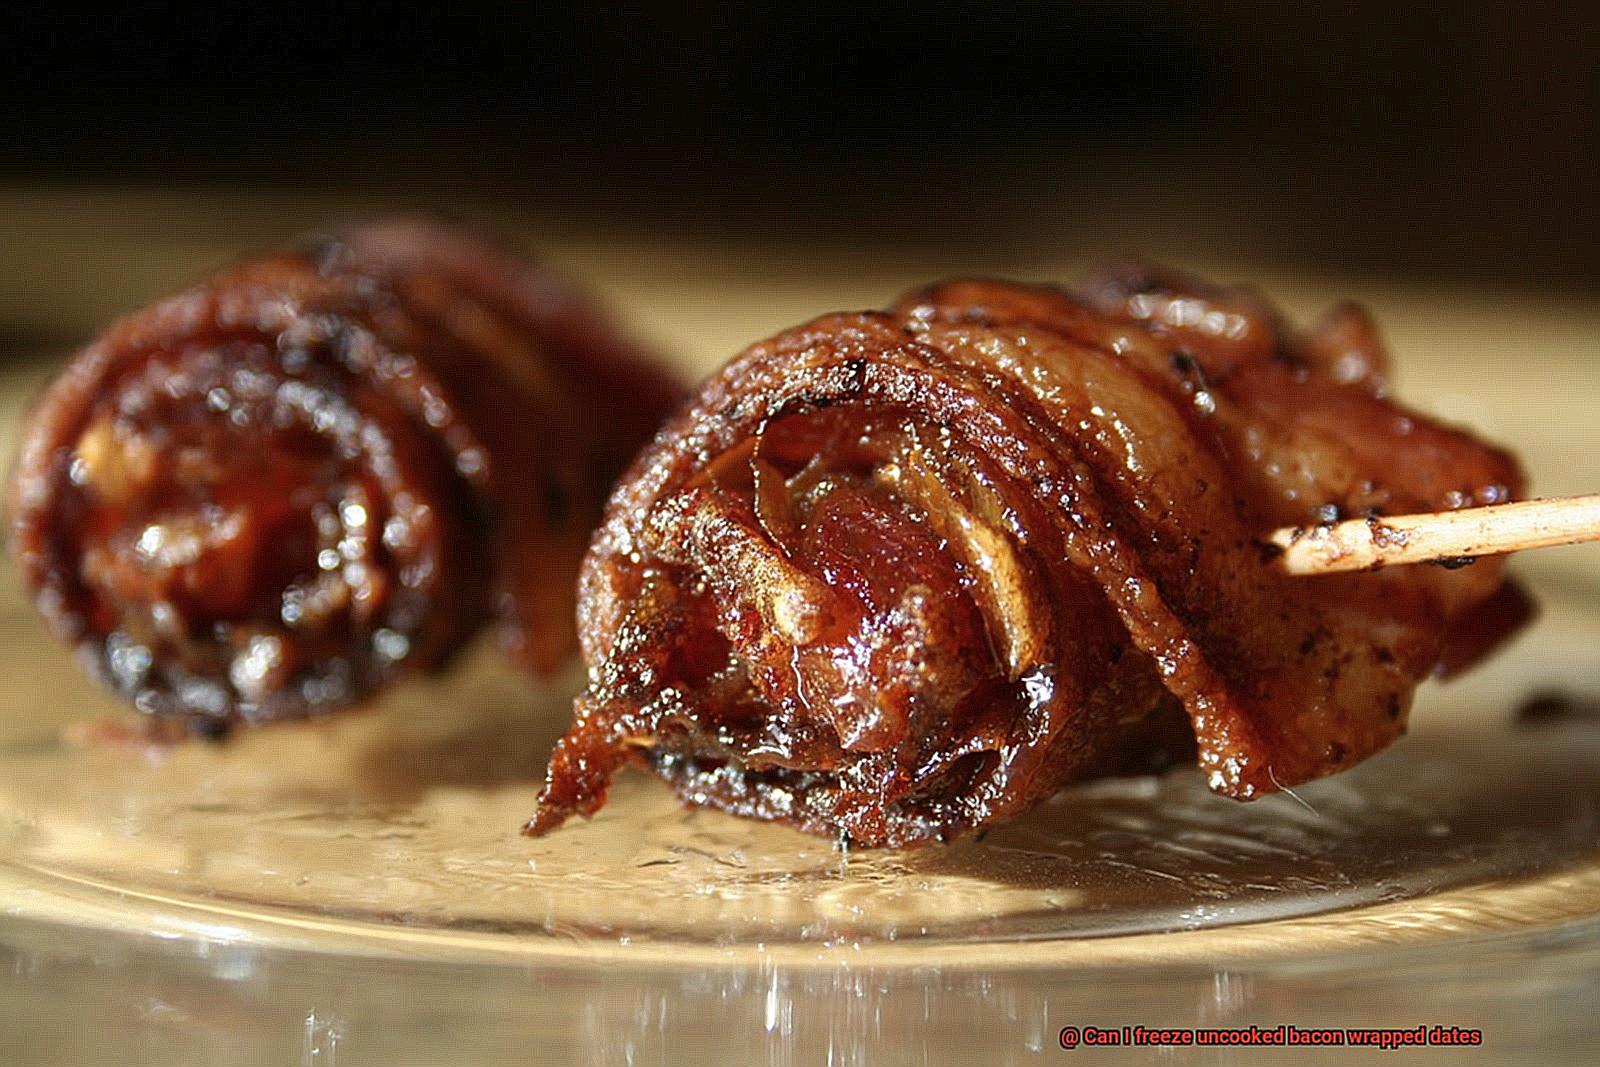 Can I freeze uncooked bacon wrapped dates-4